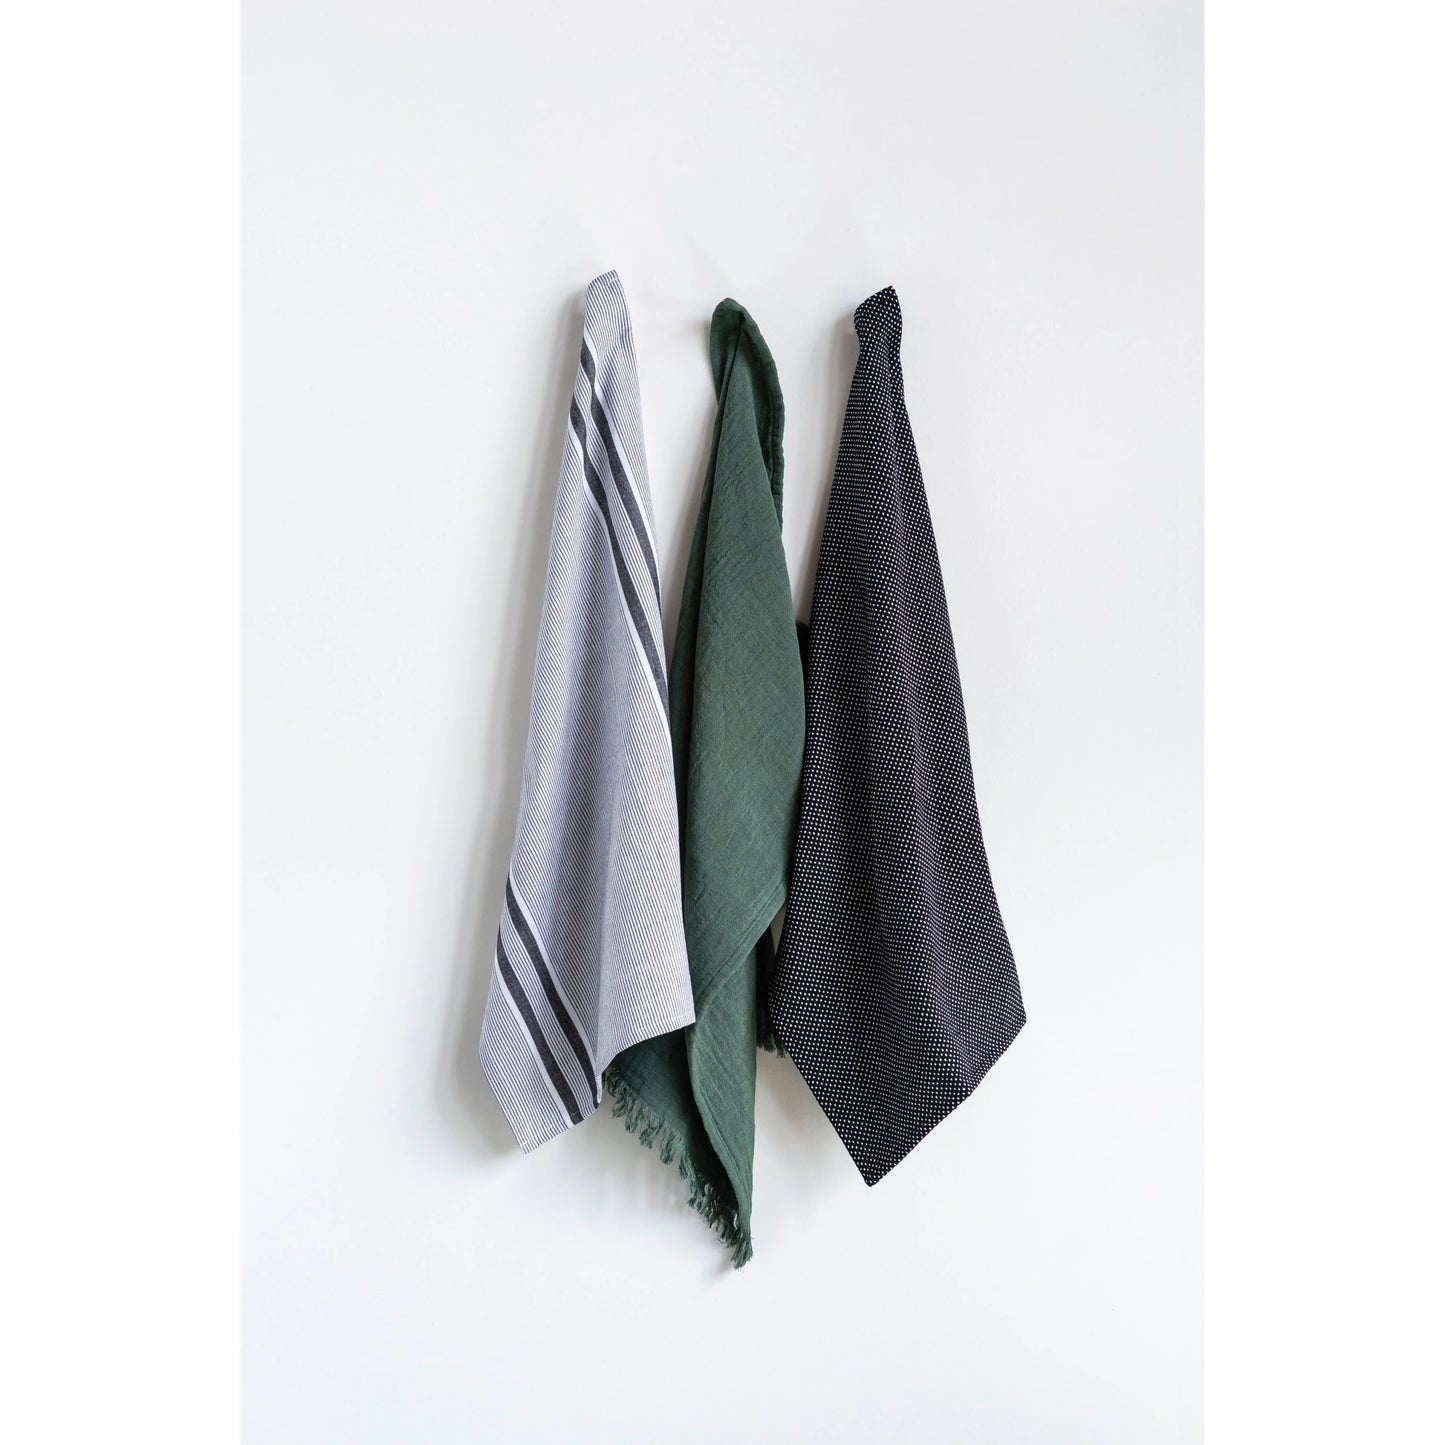 3 dish towels hanging on hooks,  1has grey and white stripes, 1 is solid green, the other is solid grey with small white dots.